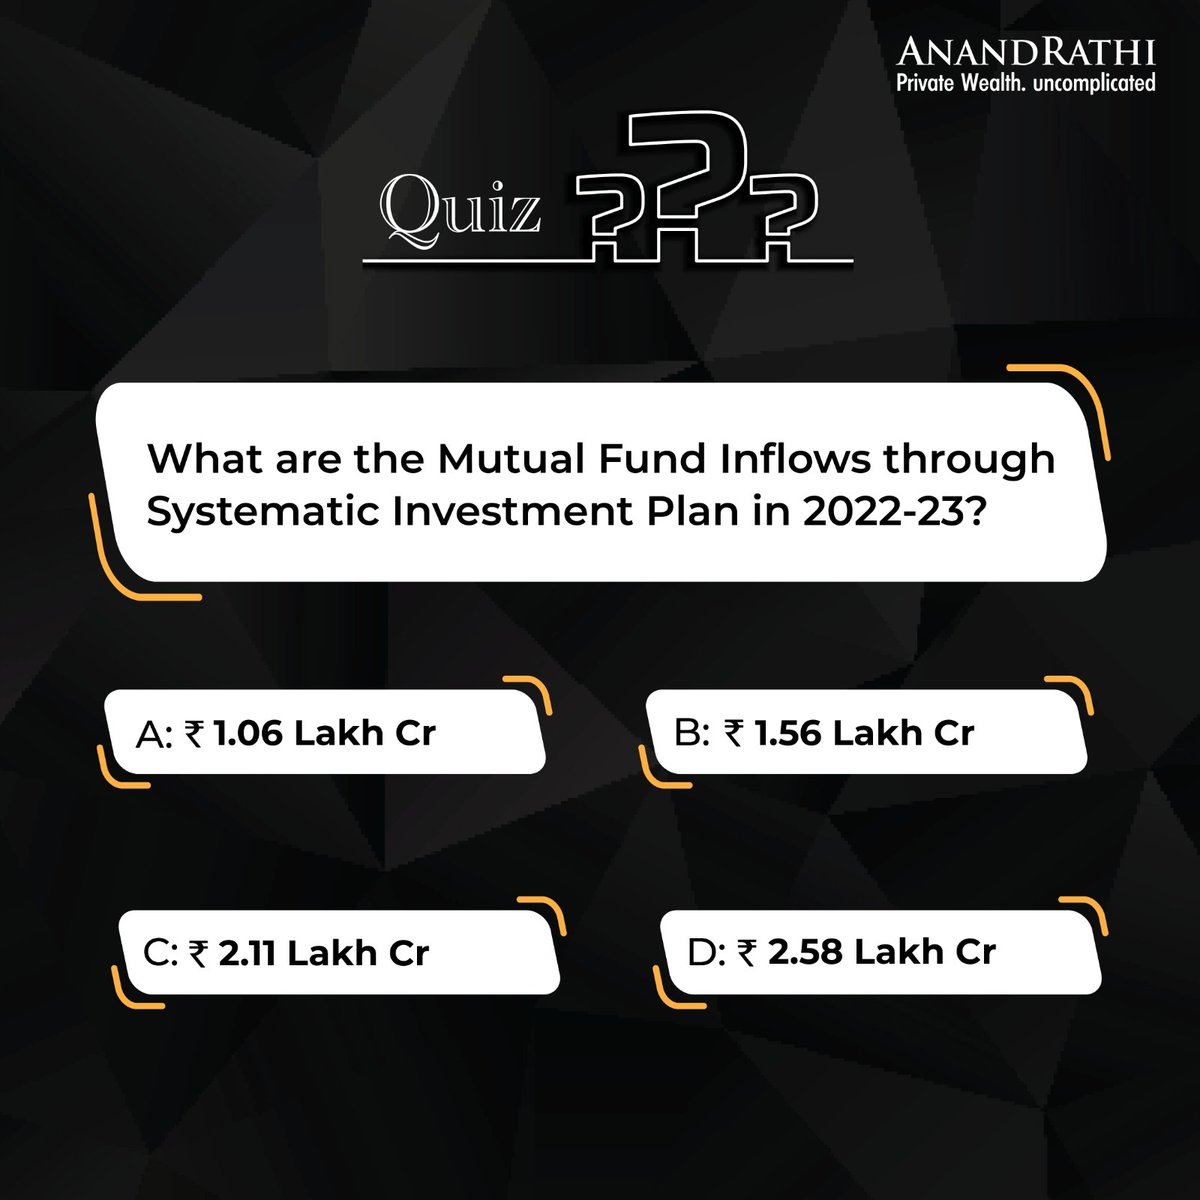 #TuesdayQuiz 

Comment your answers below

(𝐀𝐧𝐬𝐰𝐞𝐫 𝐟𝐨𝐫 𝐭𝐡𝐞 𝐪𝐮𝐢𝐳 𝐰𝐢𝐥𝐥 𝐛𝐞 𝐬𝐡𝐚𝐫𝐞𝐝 𝐭𝐨𝐦𝐨𝐫𝐫𝐨𝐰)

Know more: anandrathiwealth.in/landing

#mathematicalrevolution #financialplanning #wealthmanagement #mutualfunds #anandrathiwealth #investment #investor…